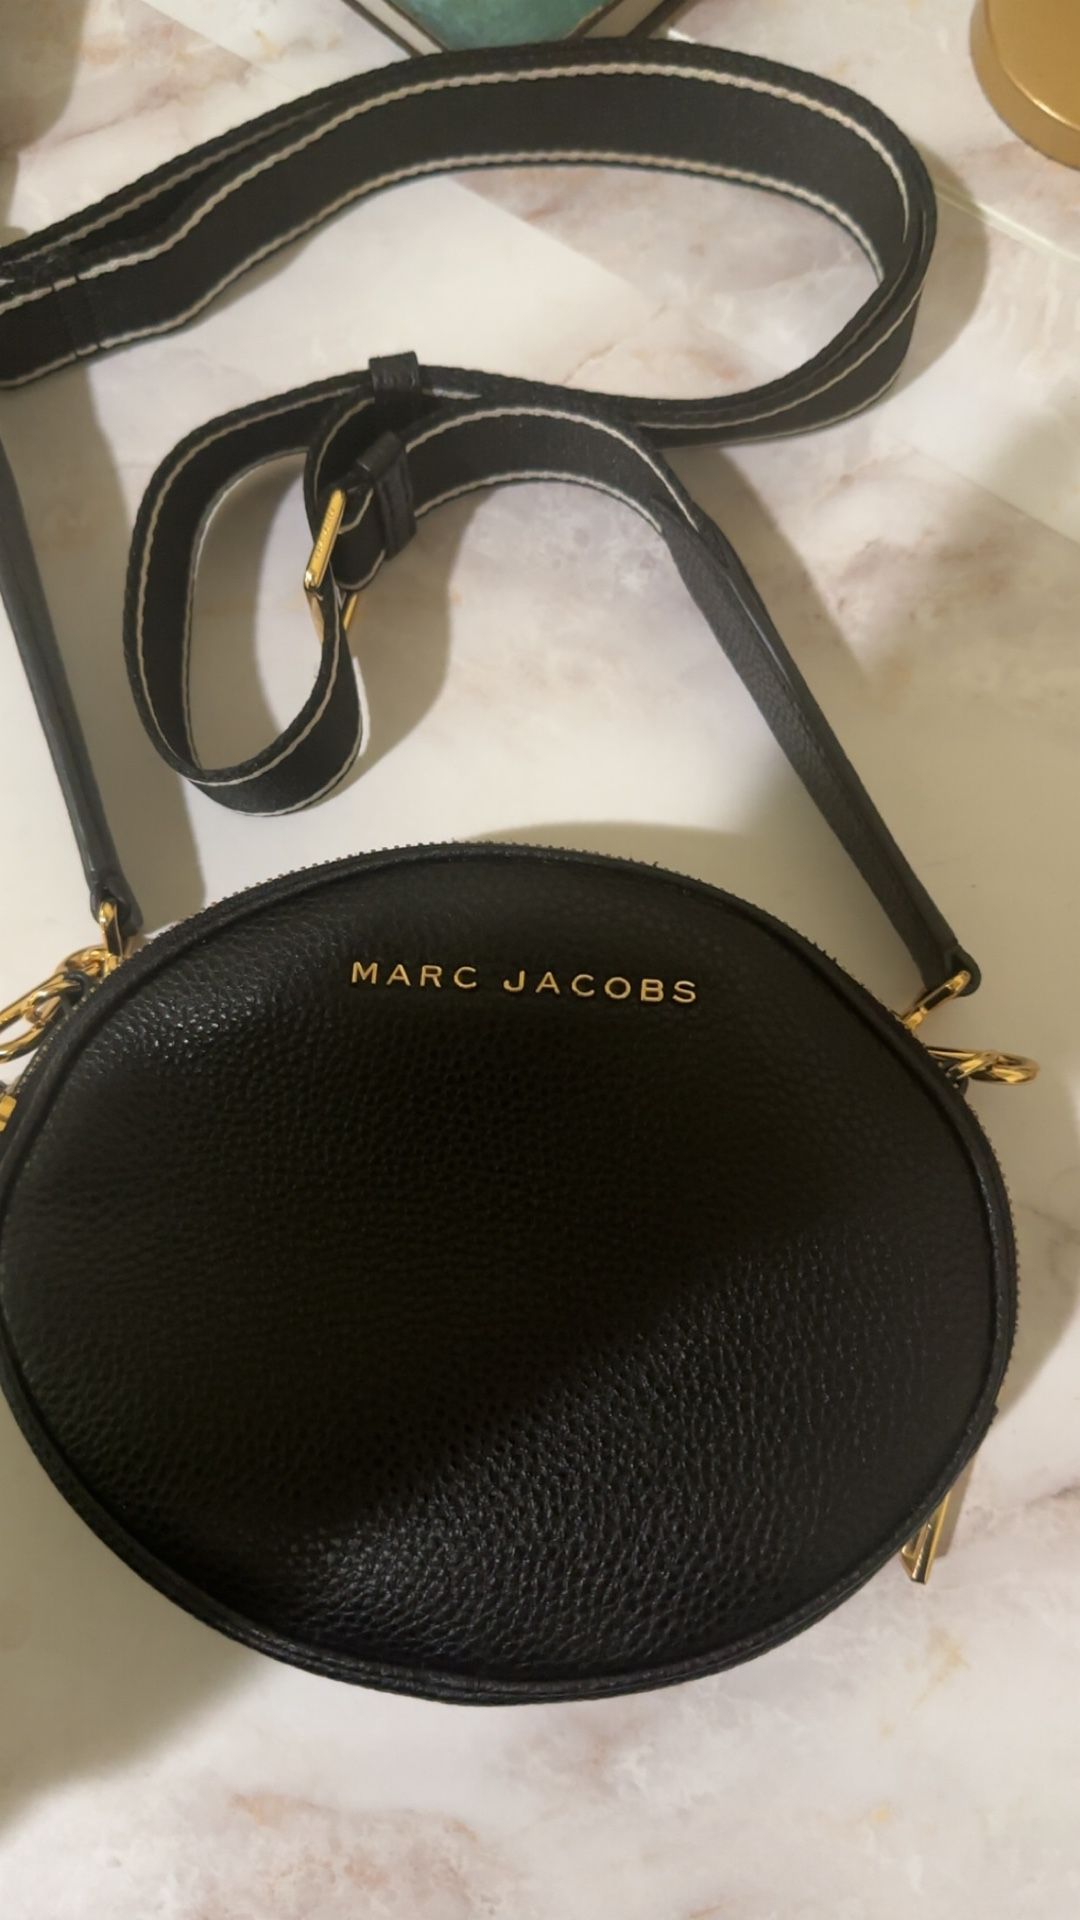 Black leather Marc jacobs purse with double zippers.